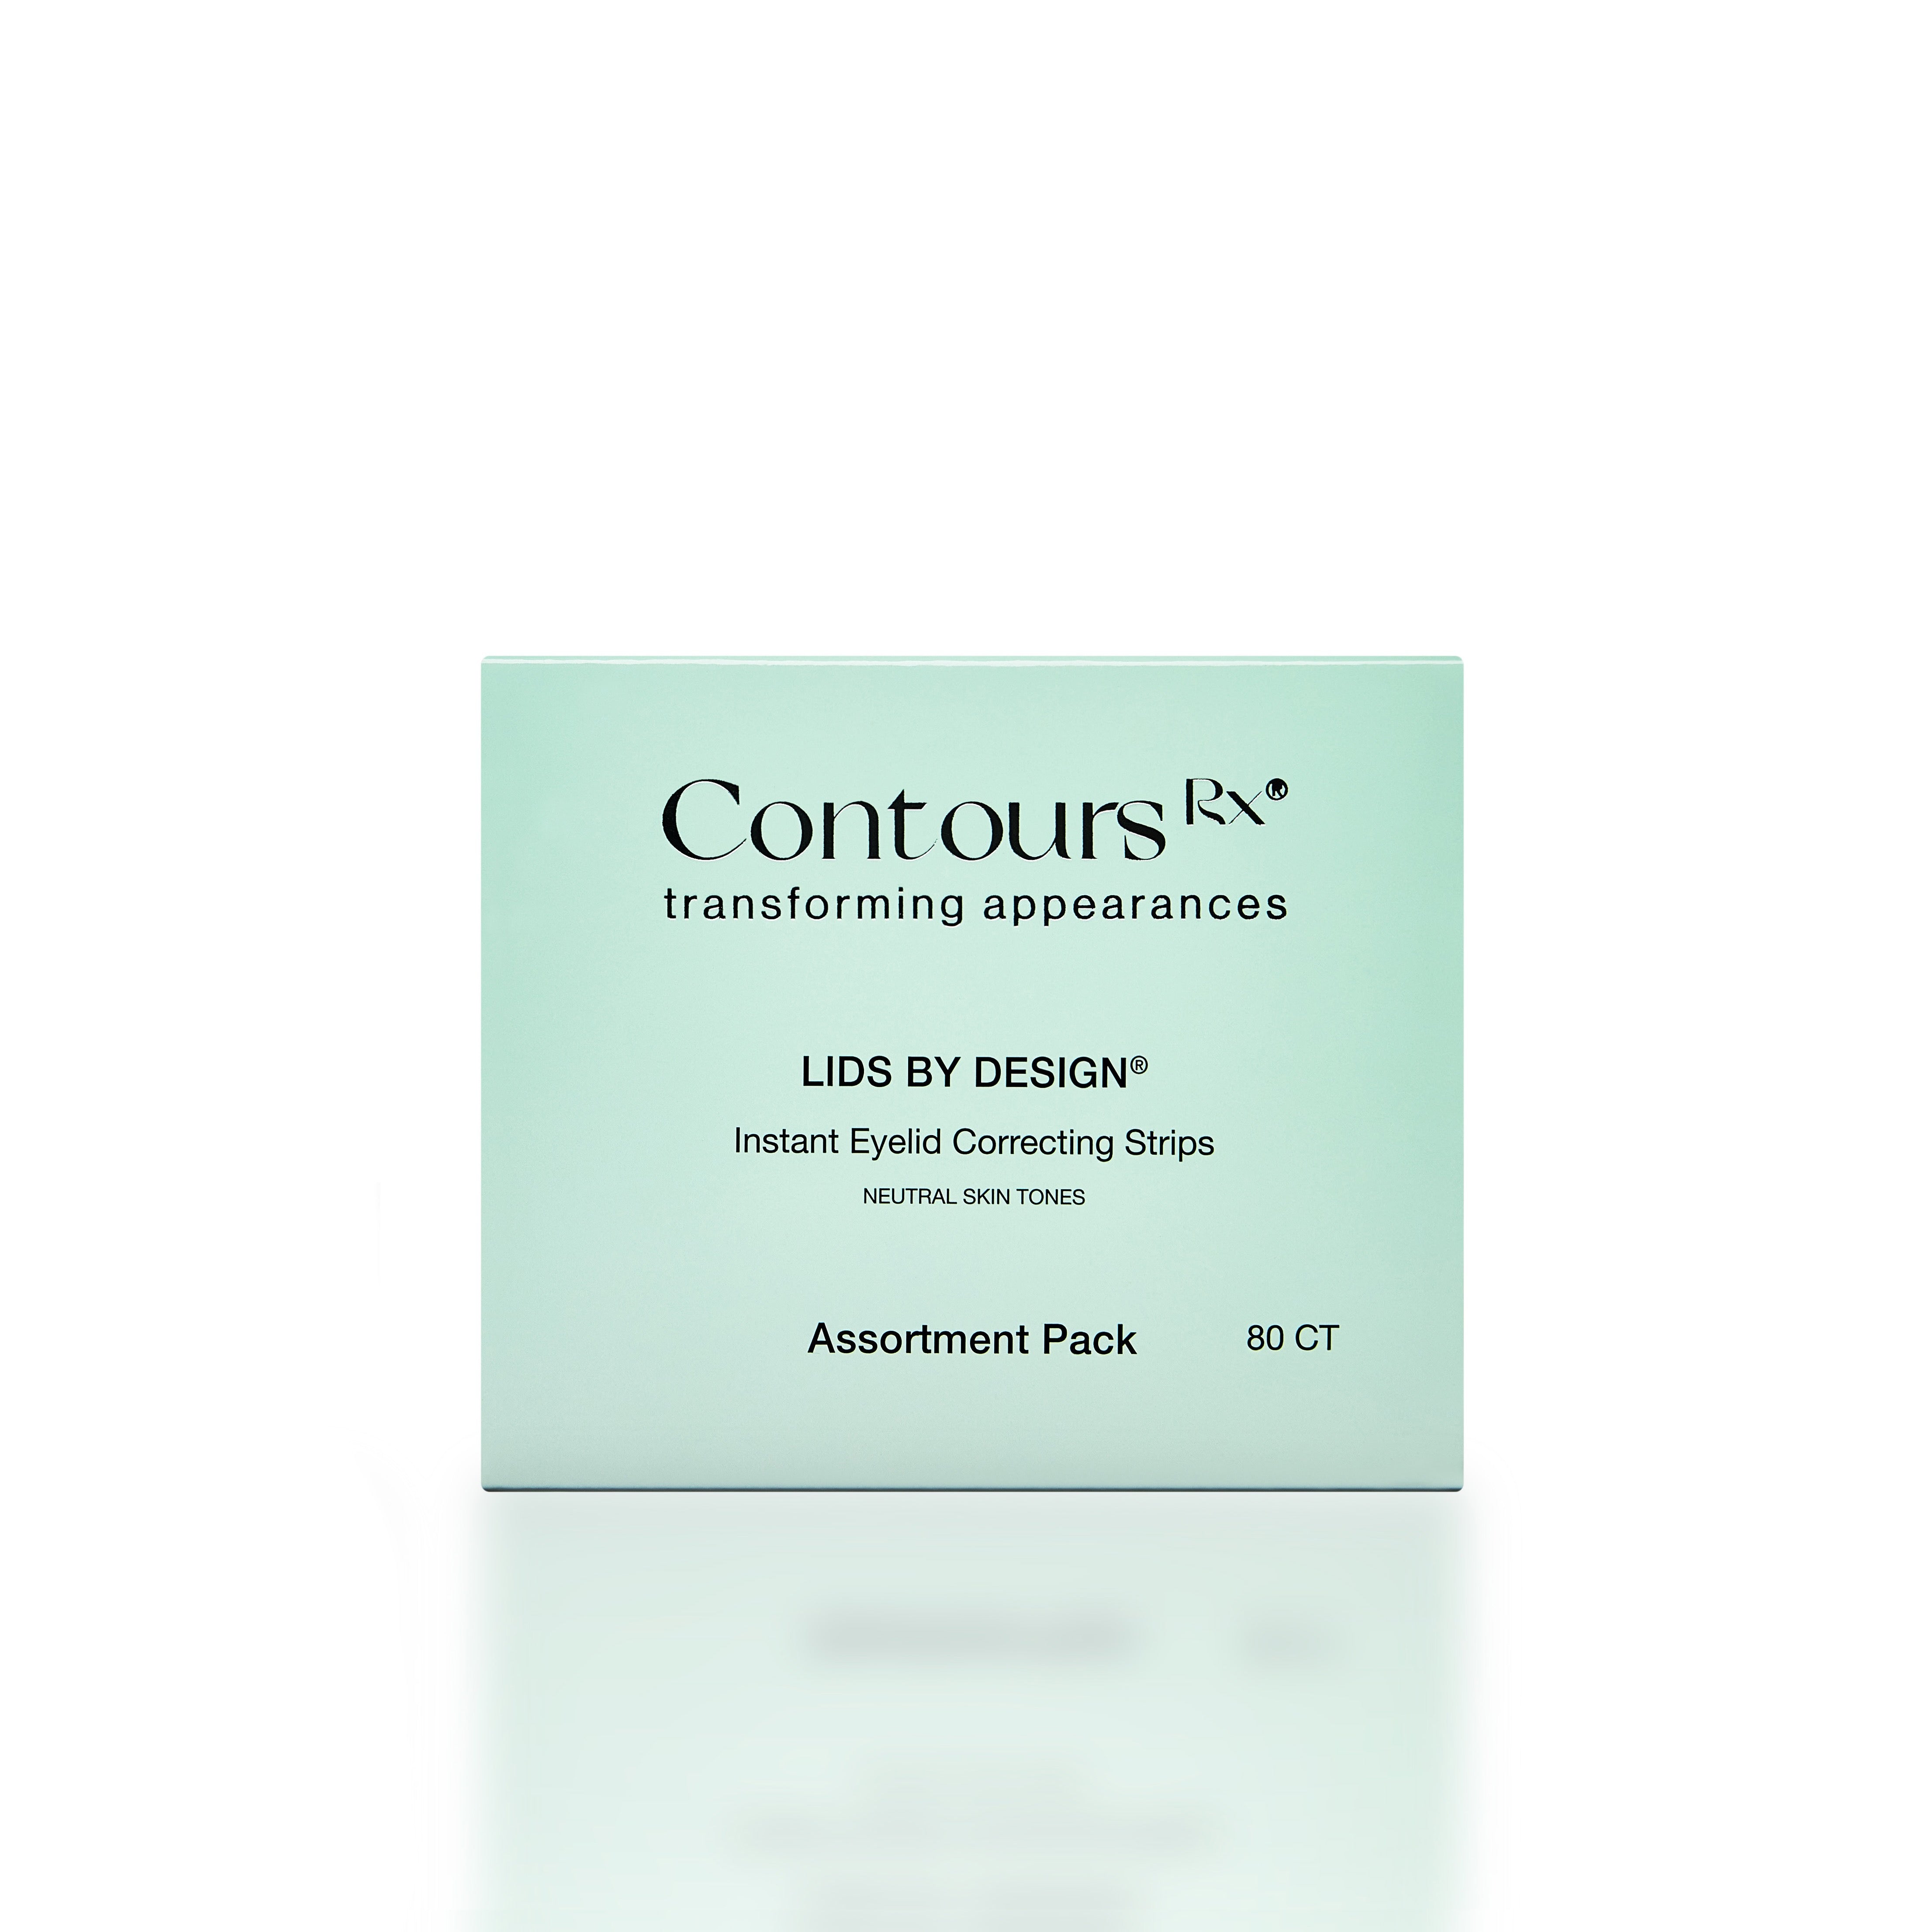  Contours Rx Lids By Design - Medical Grade Instant Eyelid  Correcting Strips for Heavy, Hooded, & Droopy Lids - Invisible, Anti-Aging,  and Hypoallergenic Eyelid Tape - (4mm - 7mm) Assortment